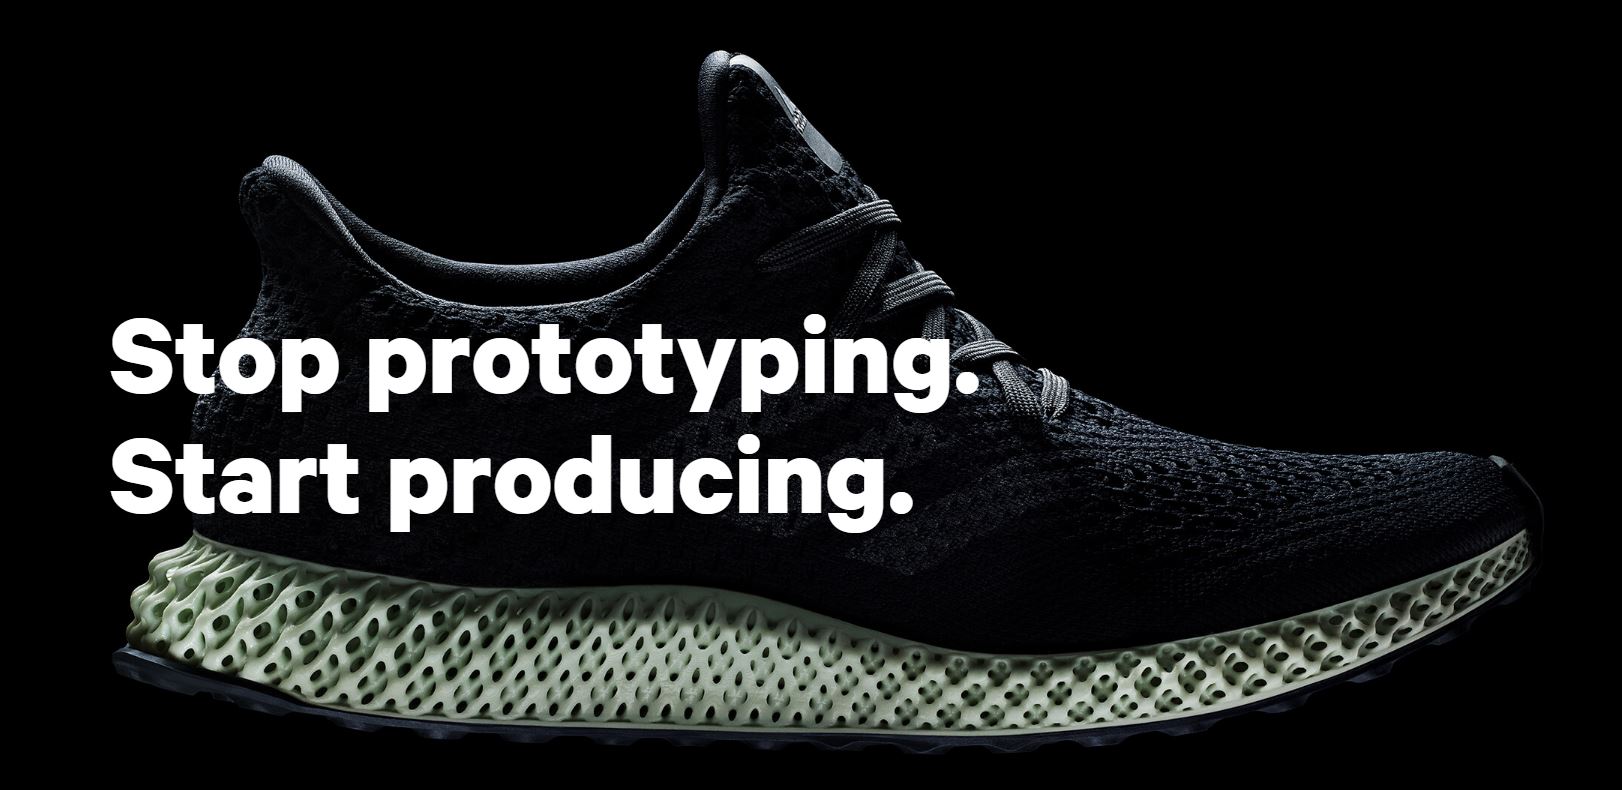 new adidas 3d printed shoes